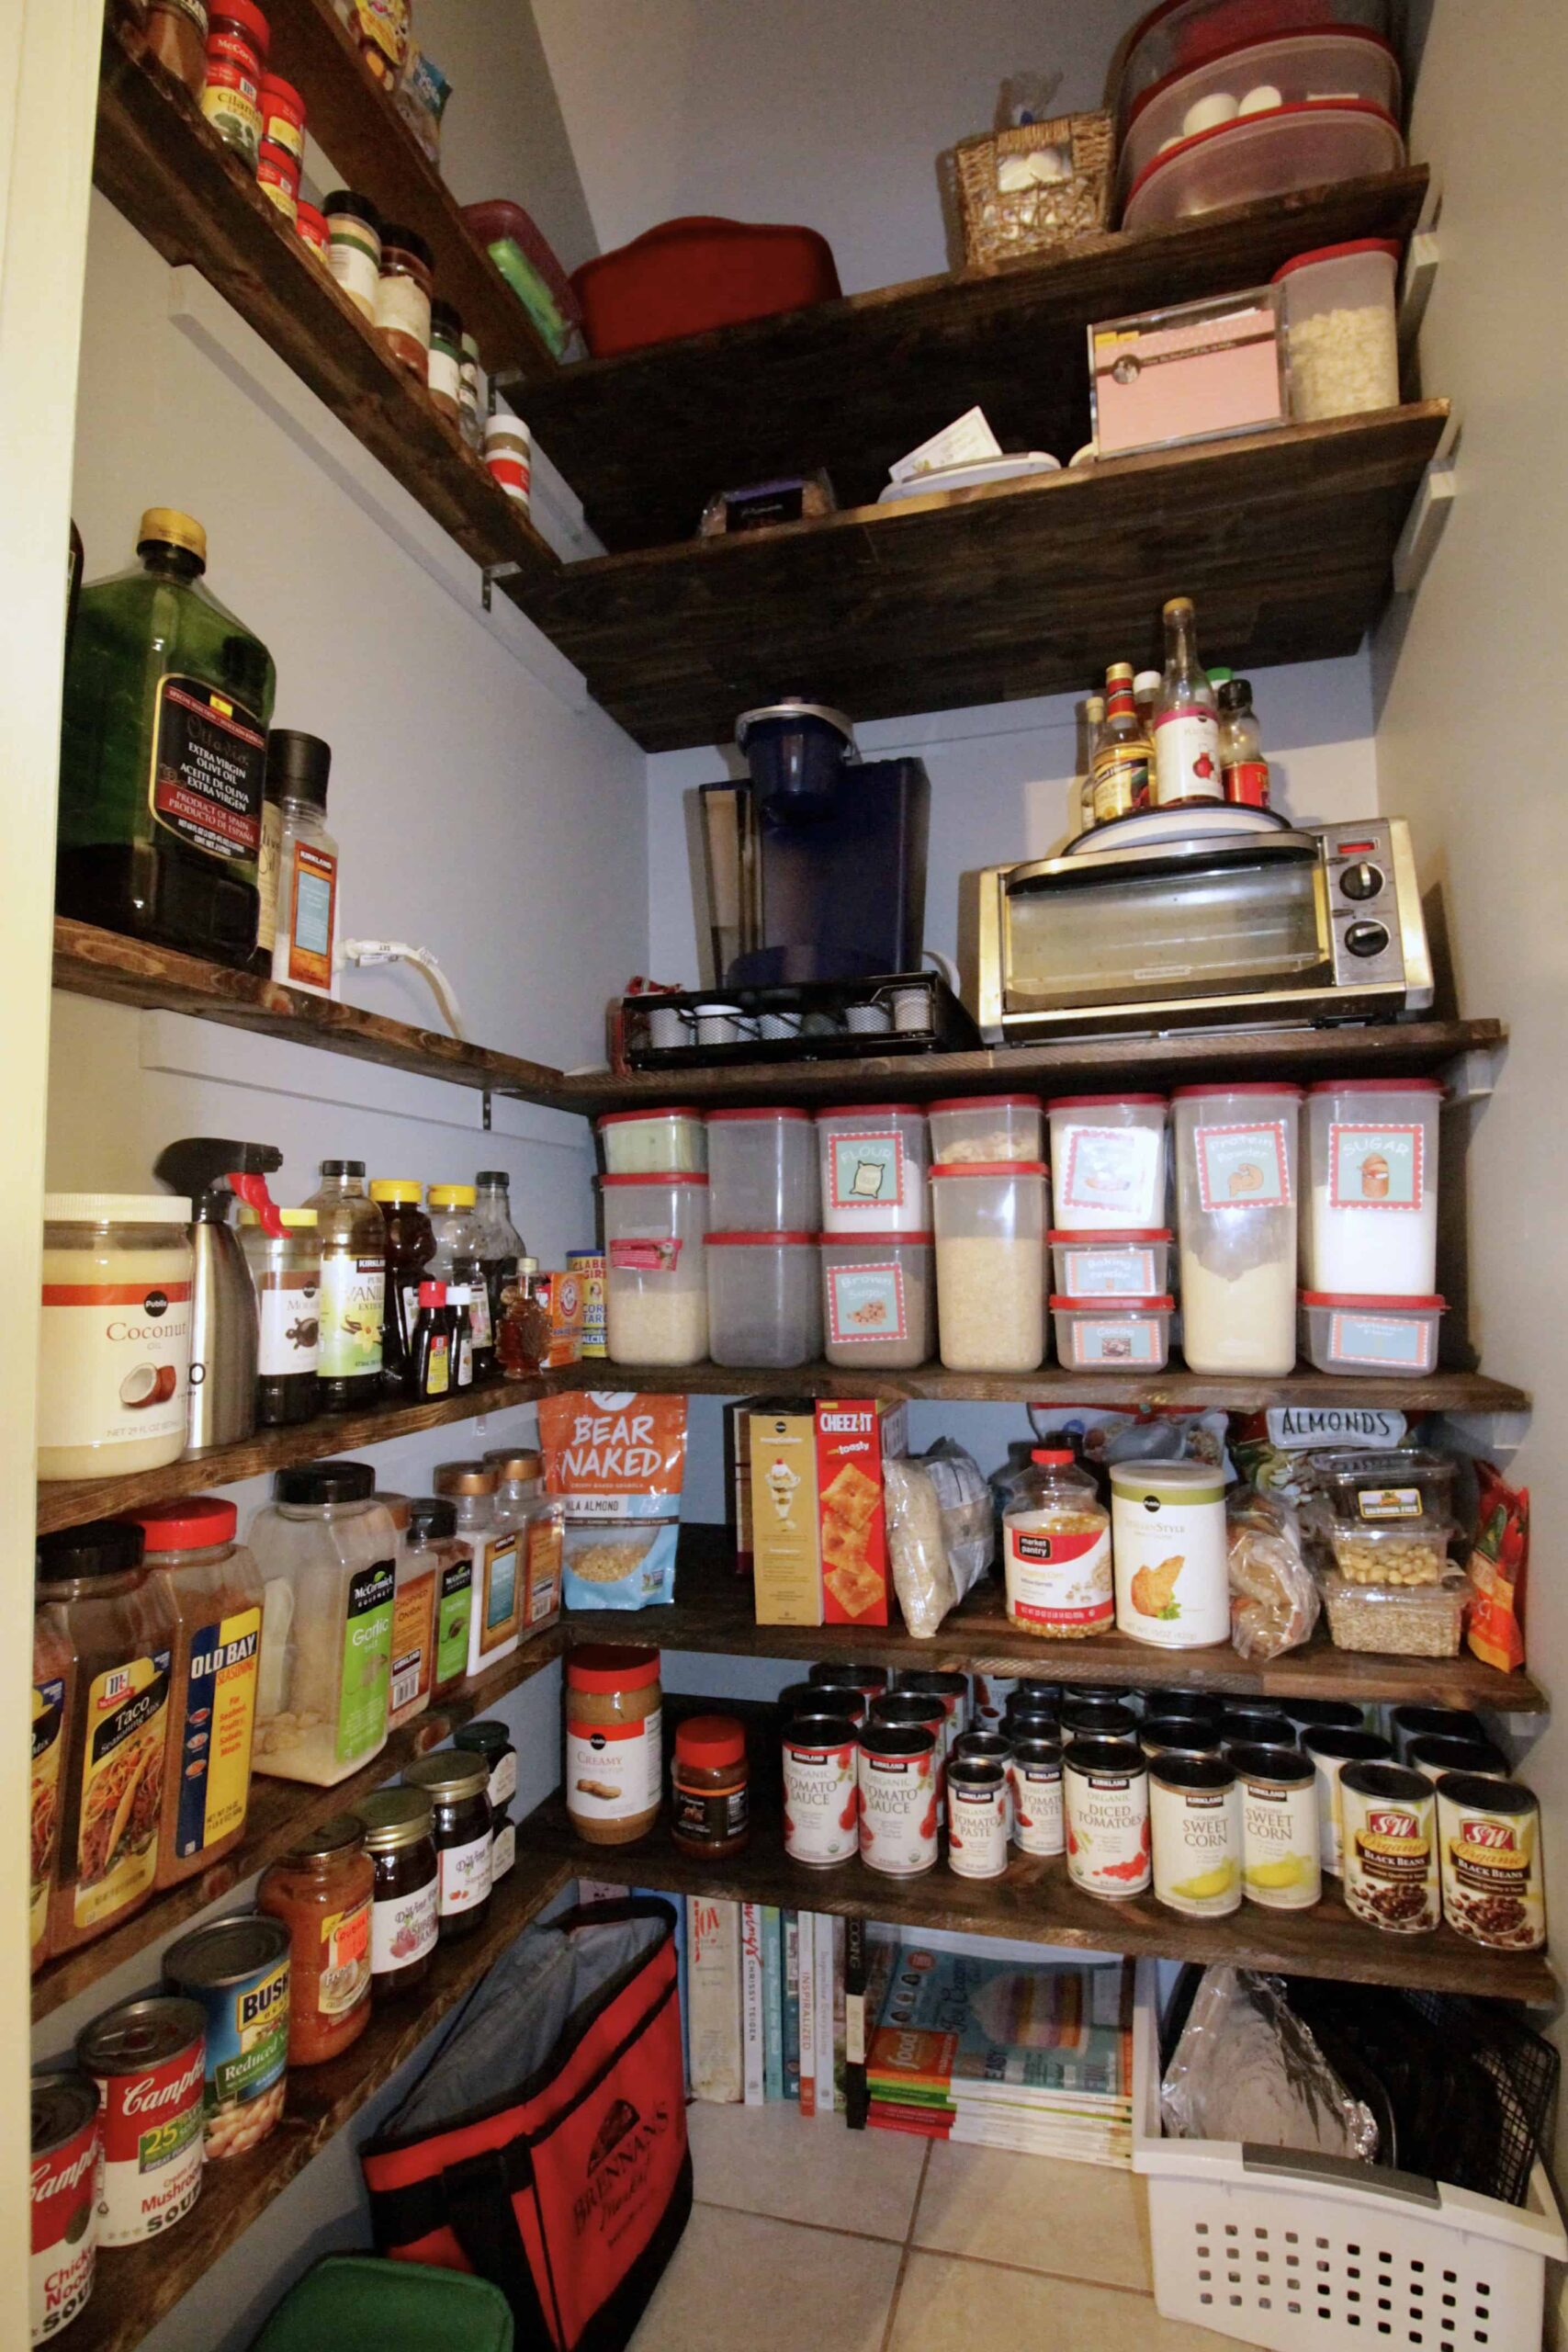 How To Build Pantry Shelves  Pantry shelving, Diy pantry shelves, Pantry  shelf